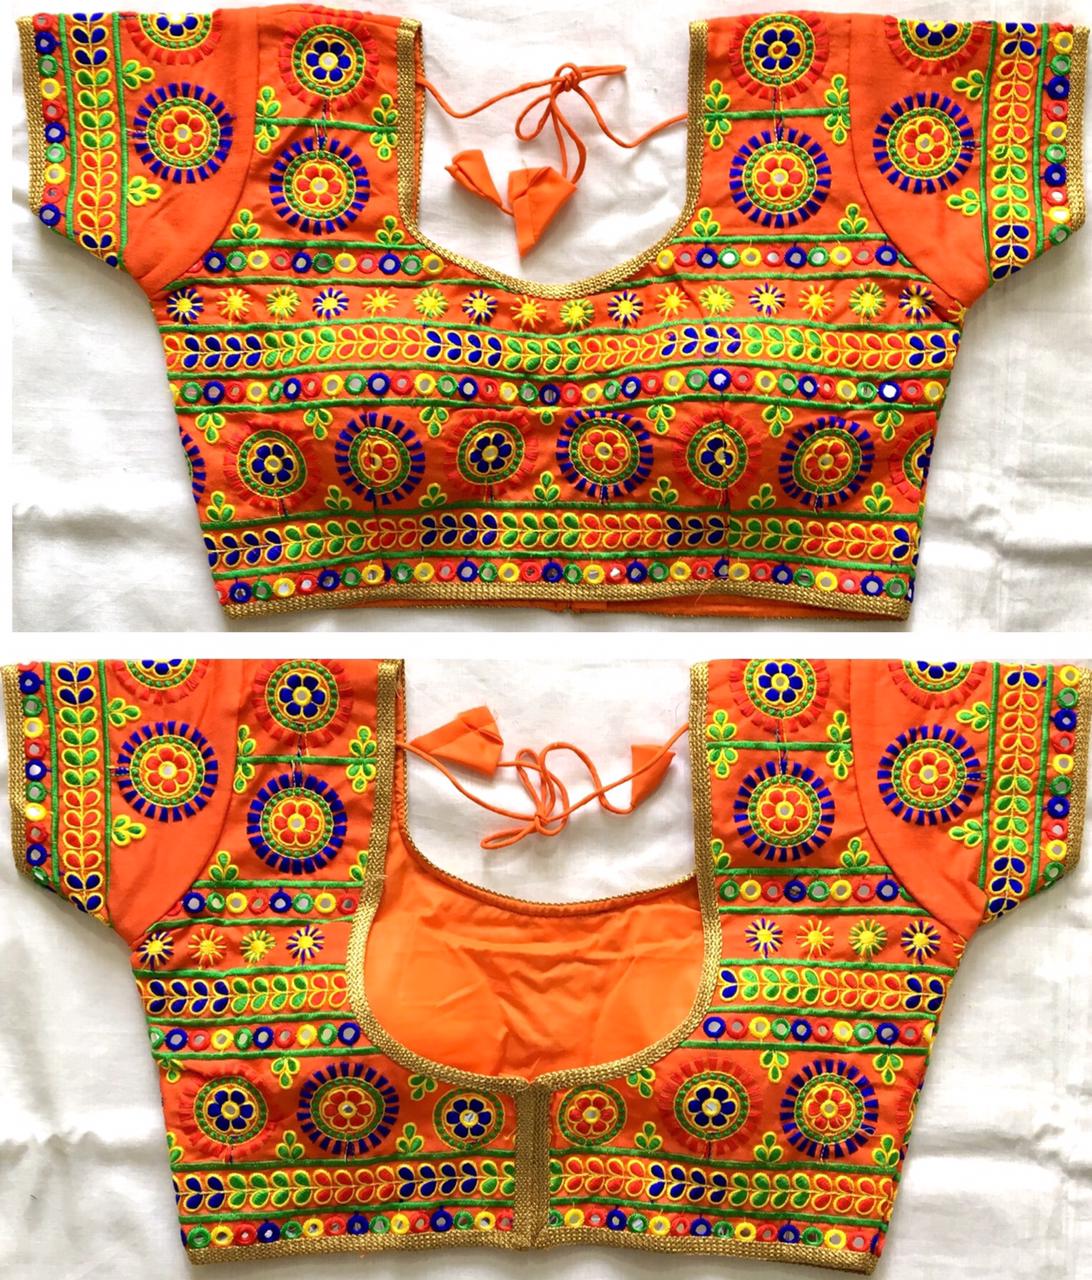 BLOUSE HAS THREAD WORK AND FOIL MIRROR WORK - Dharti Bandhani